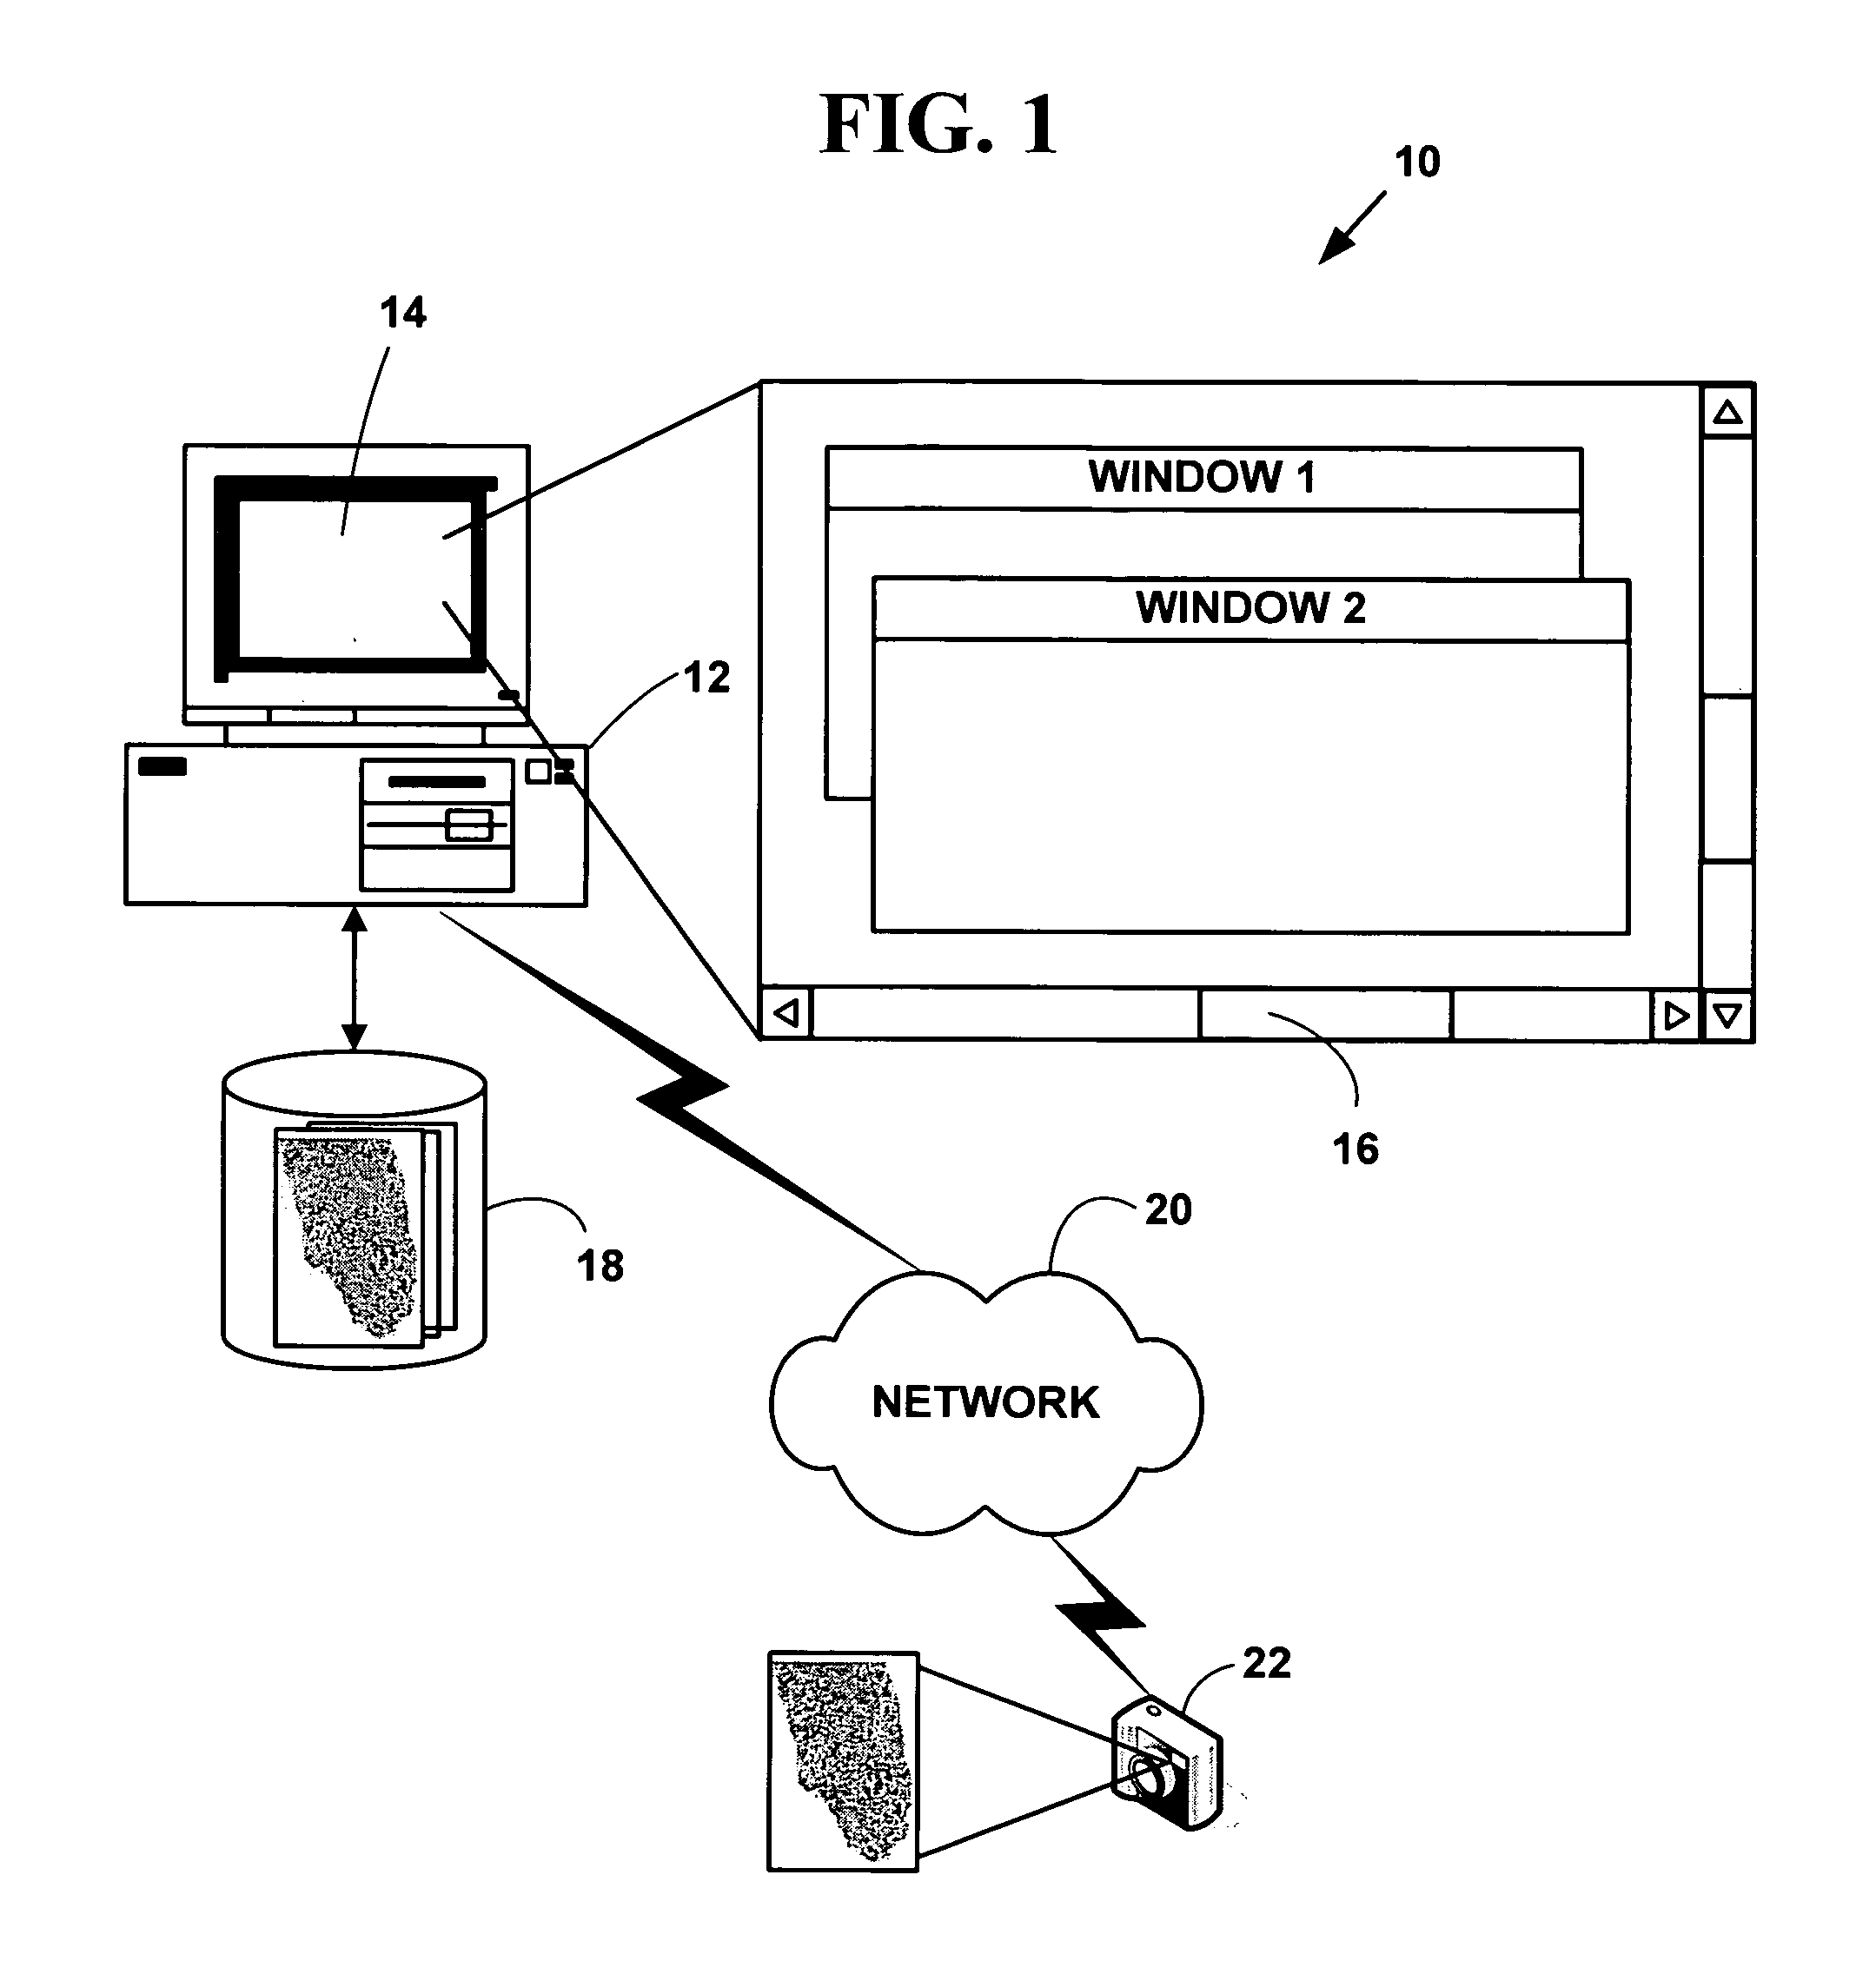 Method and system for automated digital image analysis of prostrate neoplasms using morphologic patterns